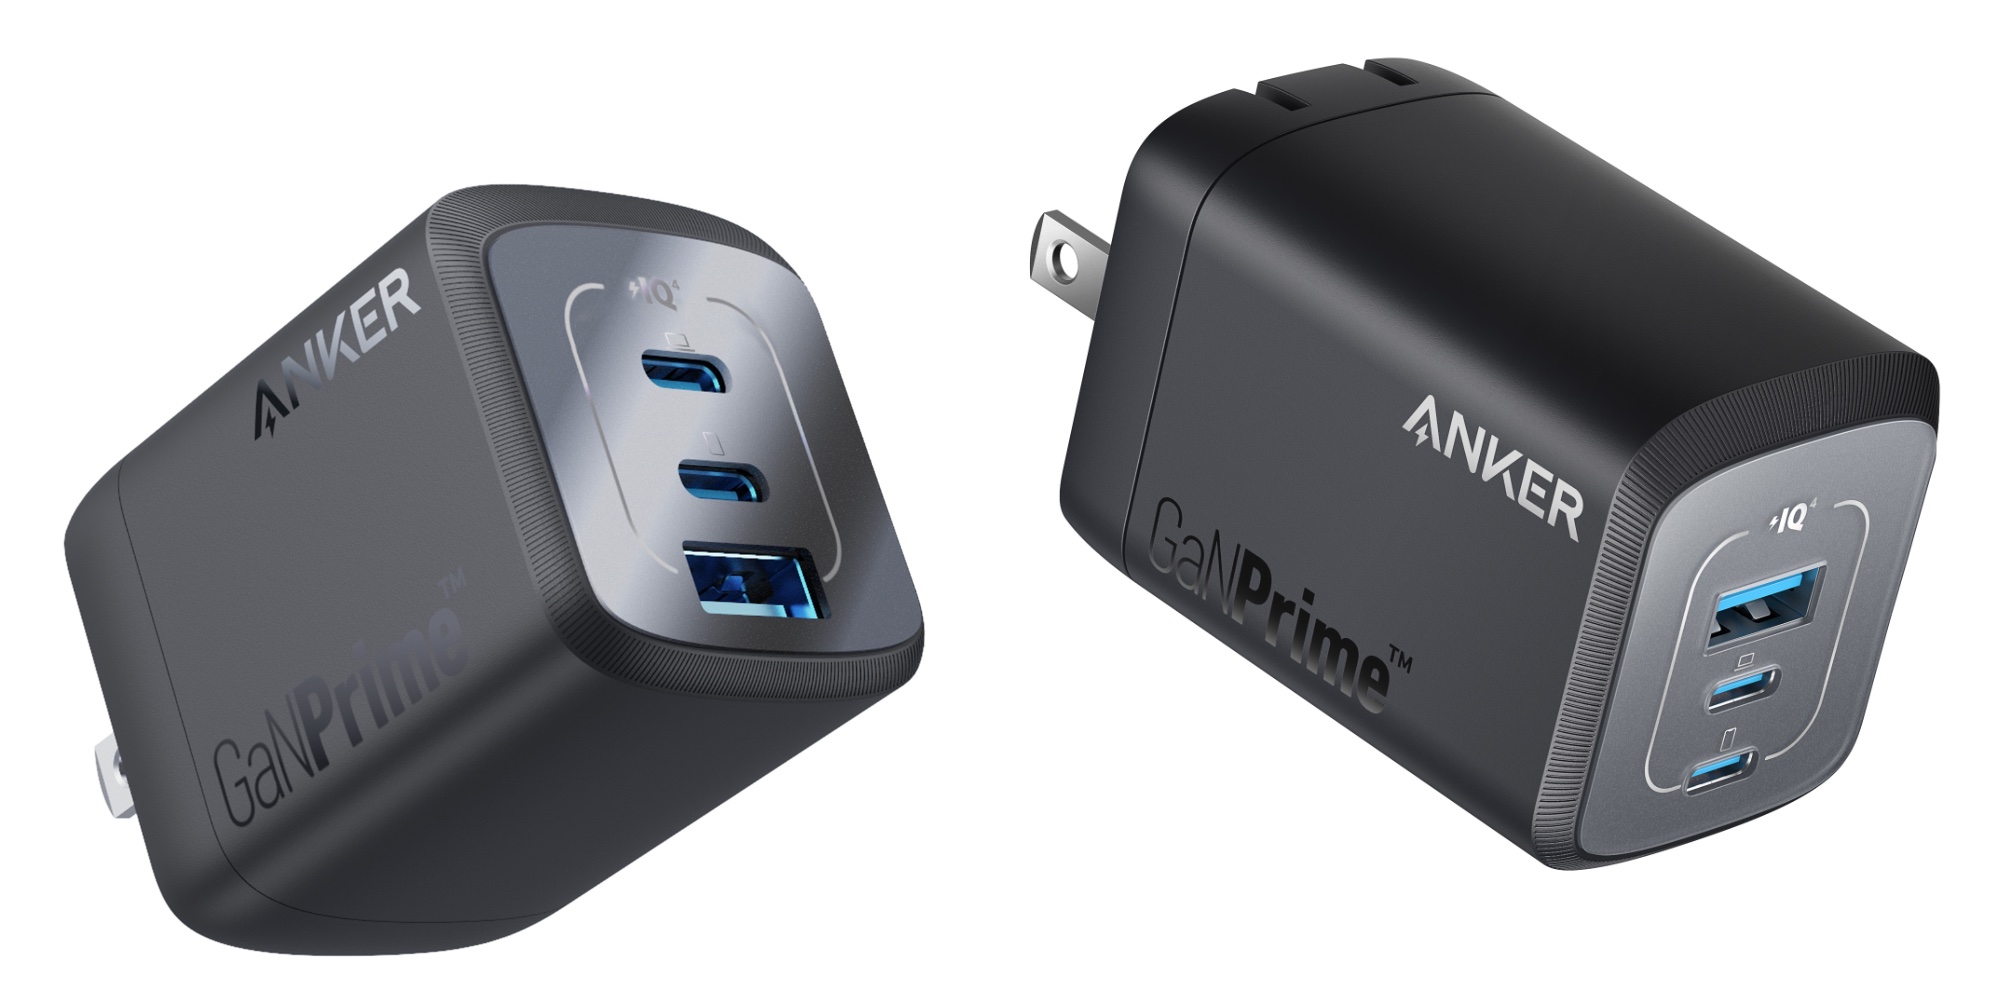 Battery charger Anker Prime Wall Charger (67W, 3ports, GaN) white A2669N21  [3 port/USB Power Delivery-adaptive /GaN (gallium nitride) adoption] anchor  Japan, Anker Japan mail order